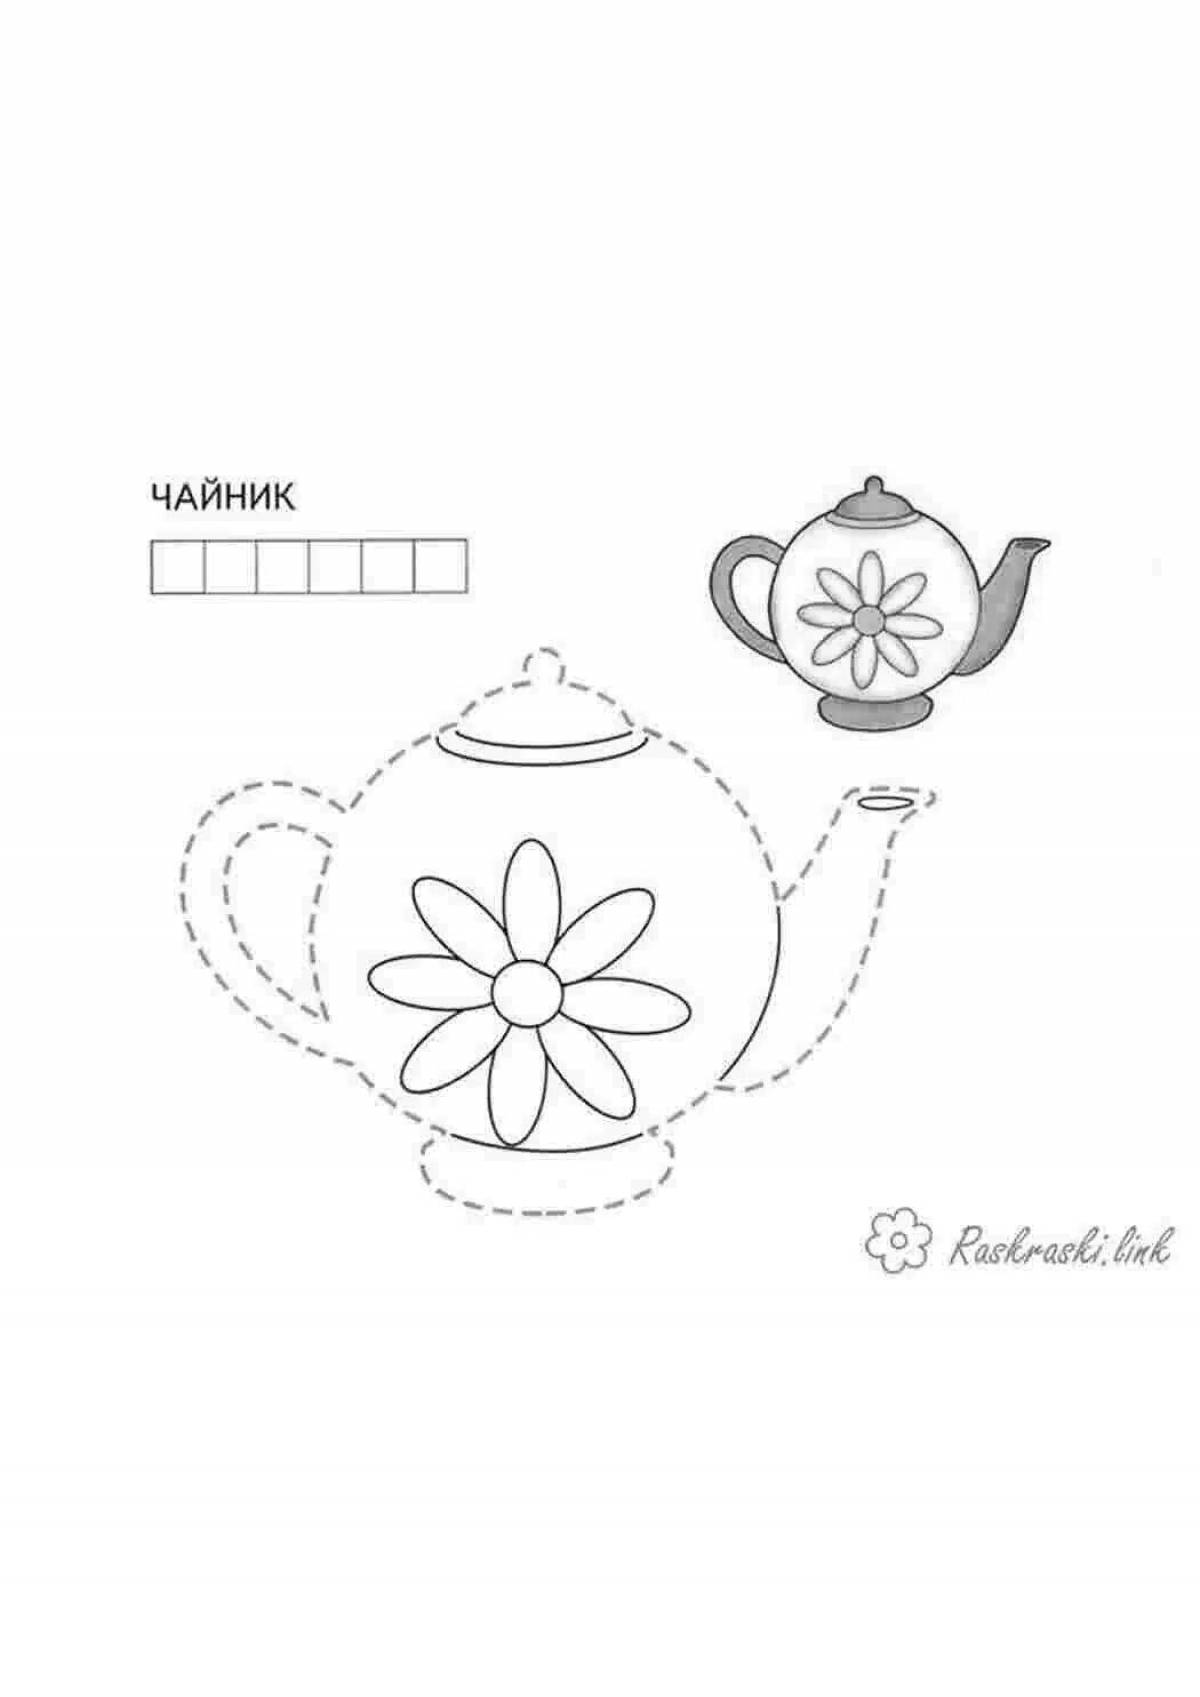 Wonderful teapot coloring book for 3-4 year olds